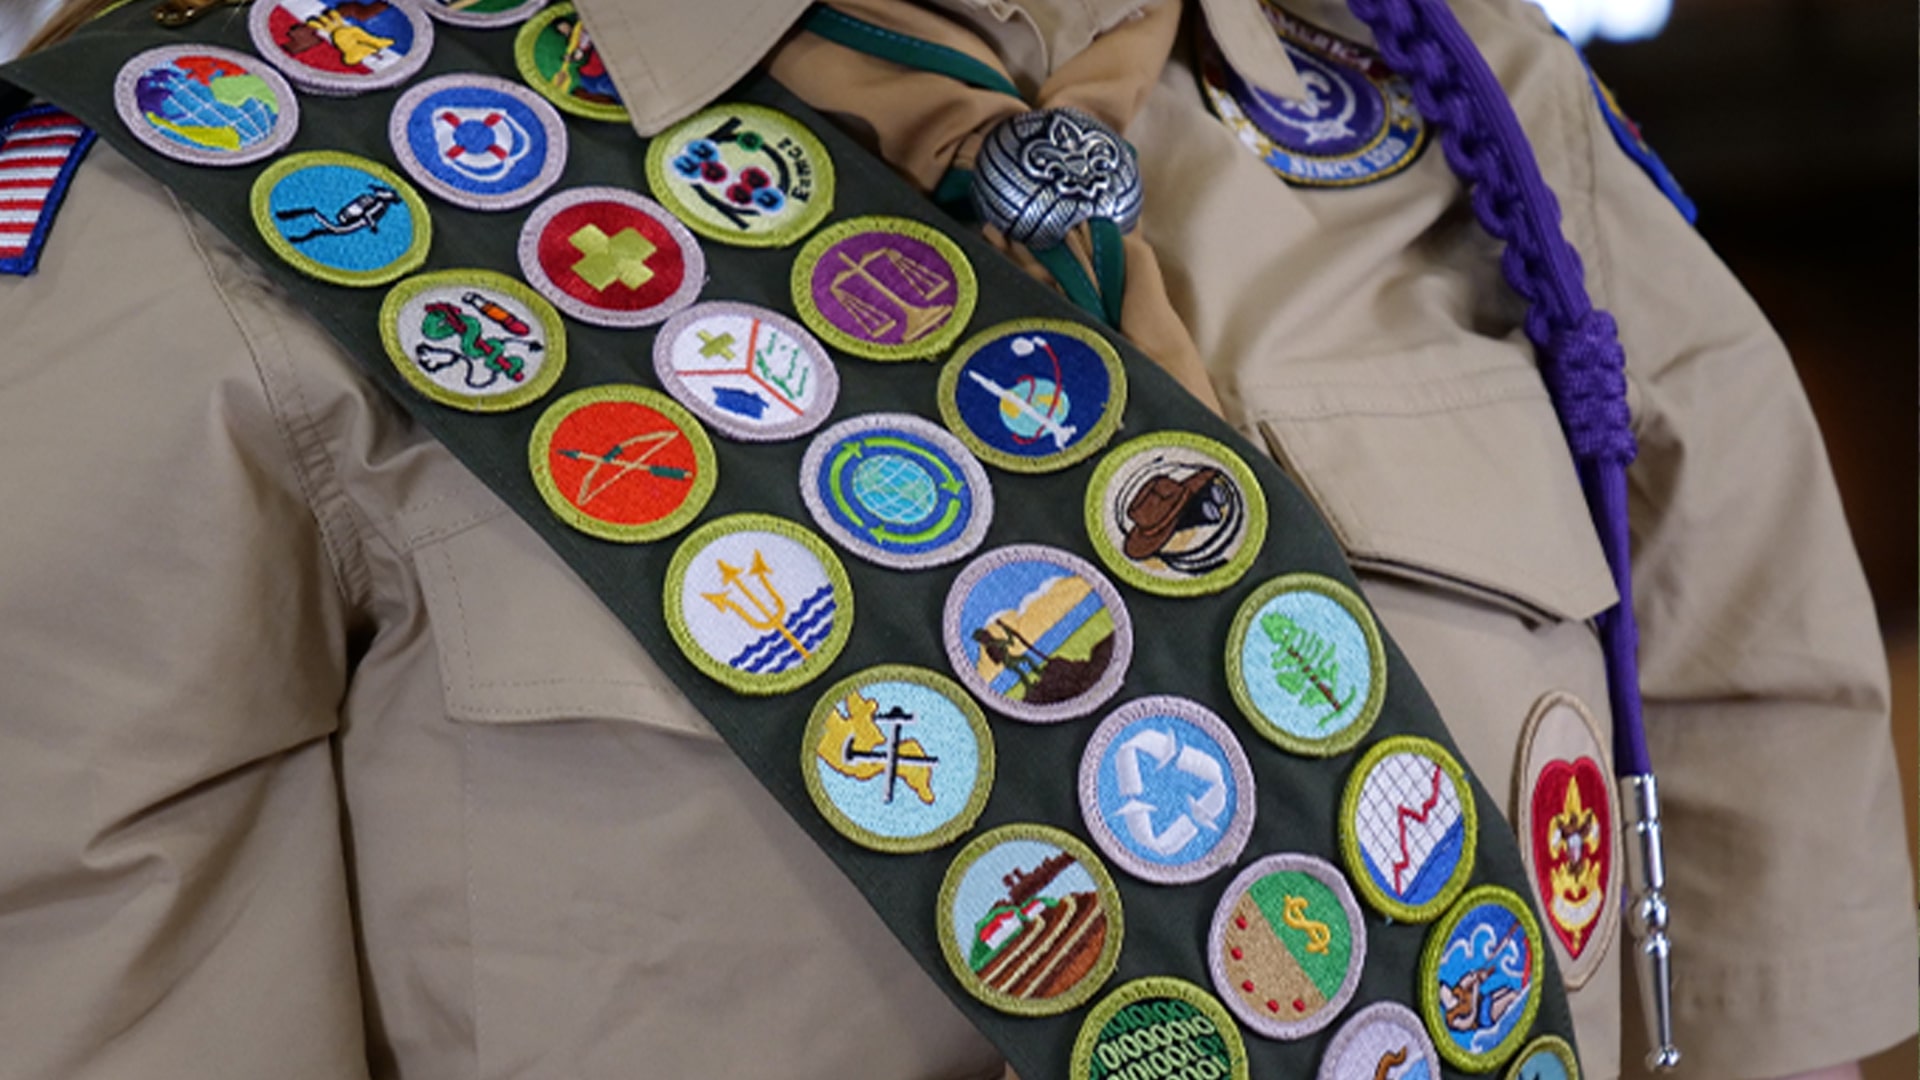 A close-up view of a Scout's merit badges sewn onto their sash